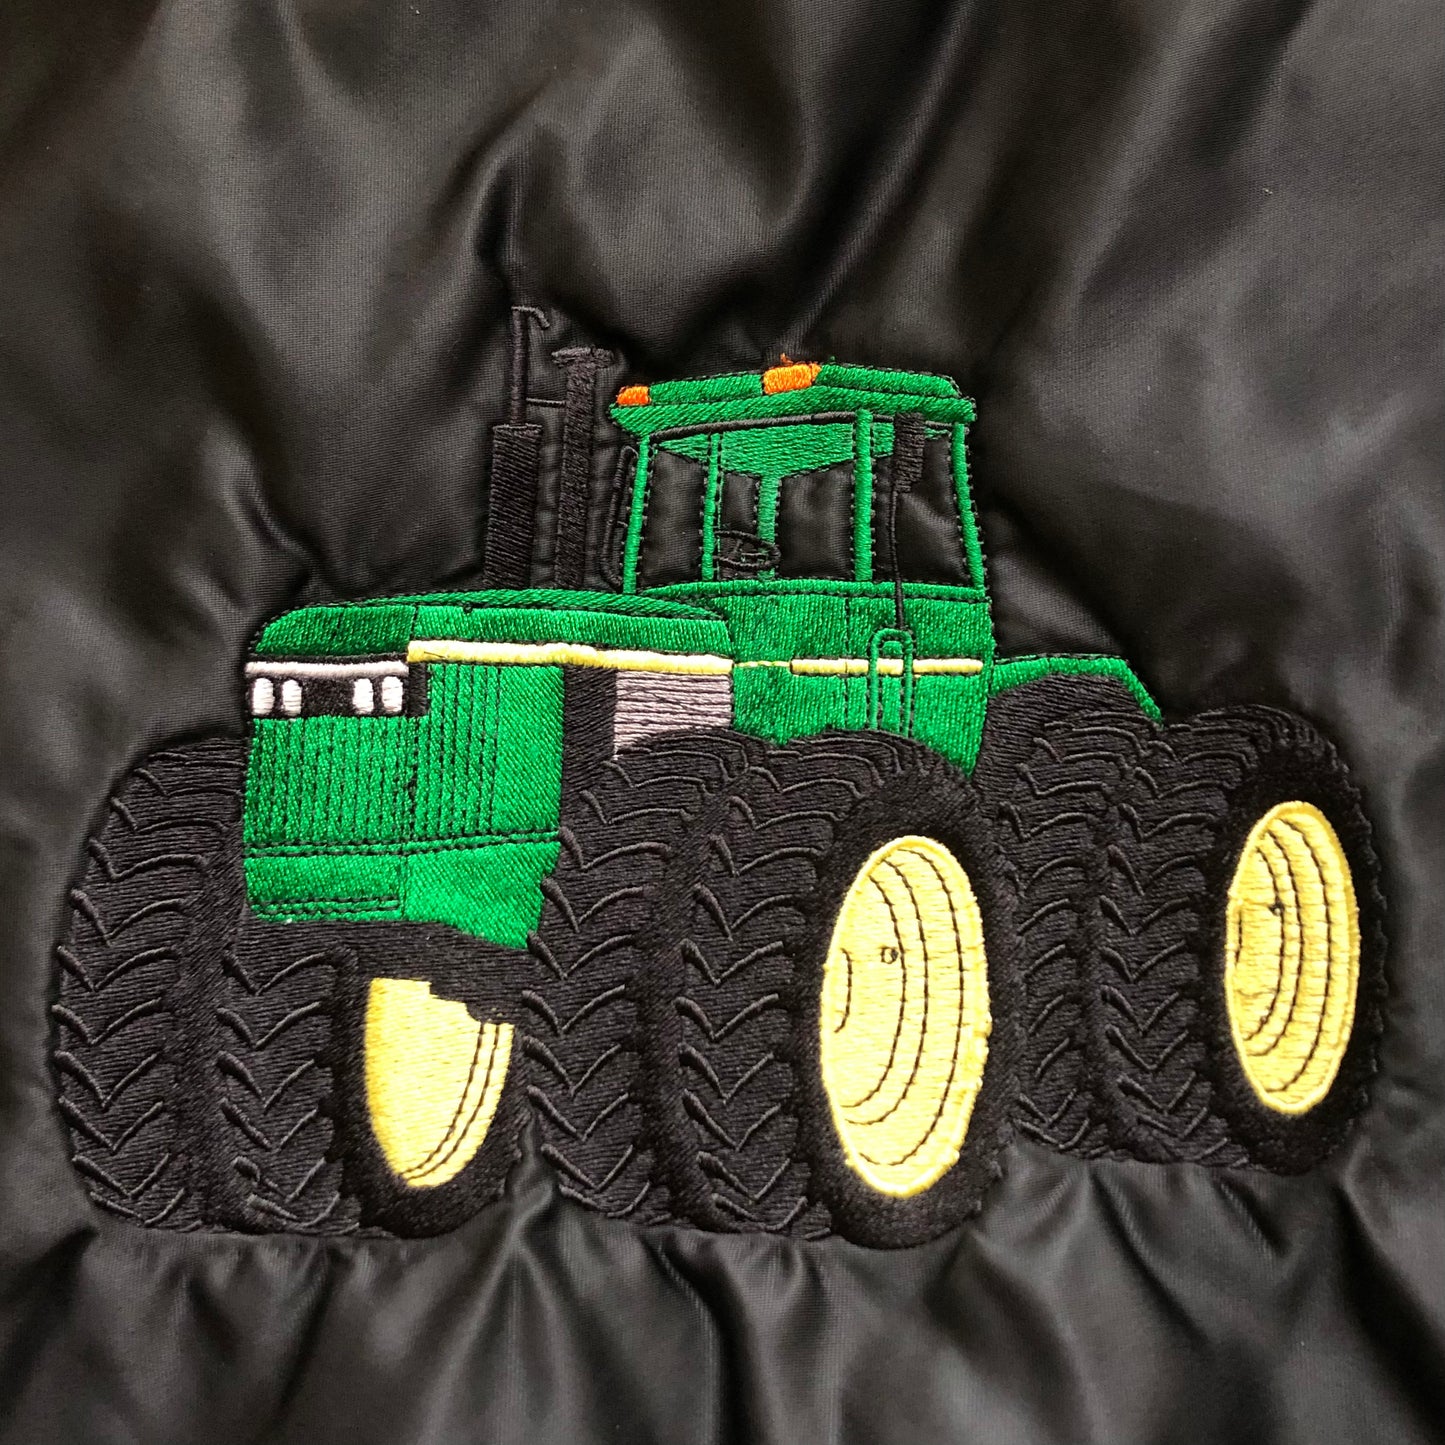 Vintage Men’s Butwin Nylon Bomber Jacket with Embroidered John Deere Tractor | Made in USA